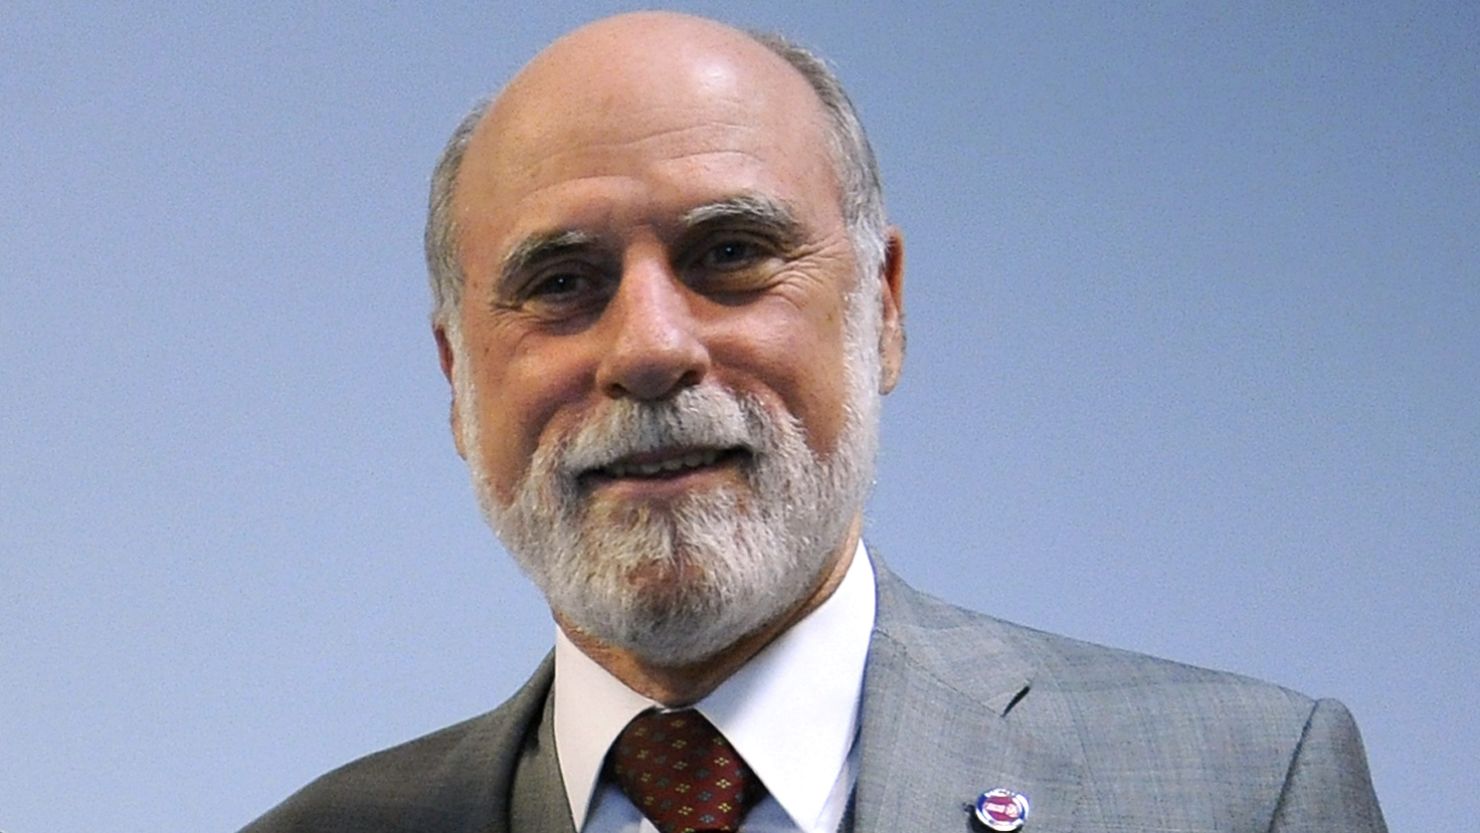 Vinton Cerf is considered one of the fathers of the Internet and is now a vice president at Google.